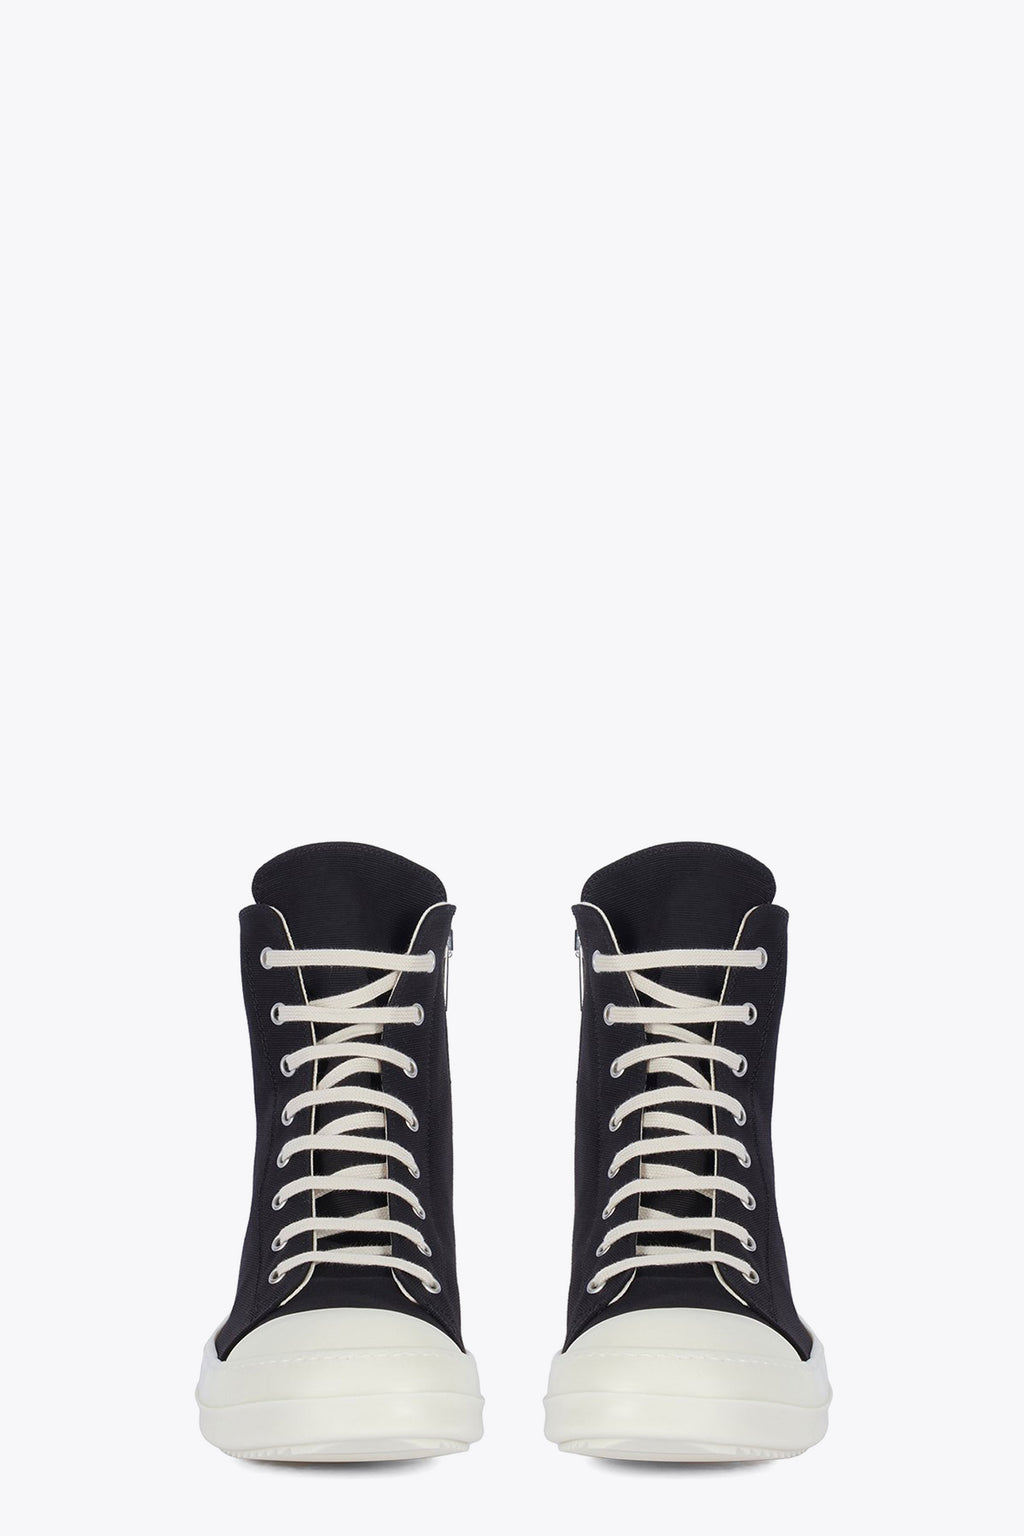 alt-image__Black-cotton-lace-up-high-sneaker-with-eyelets---Hi-sneaks